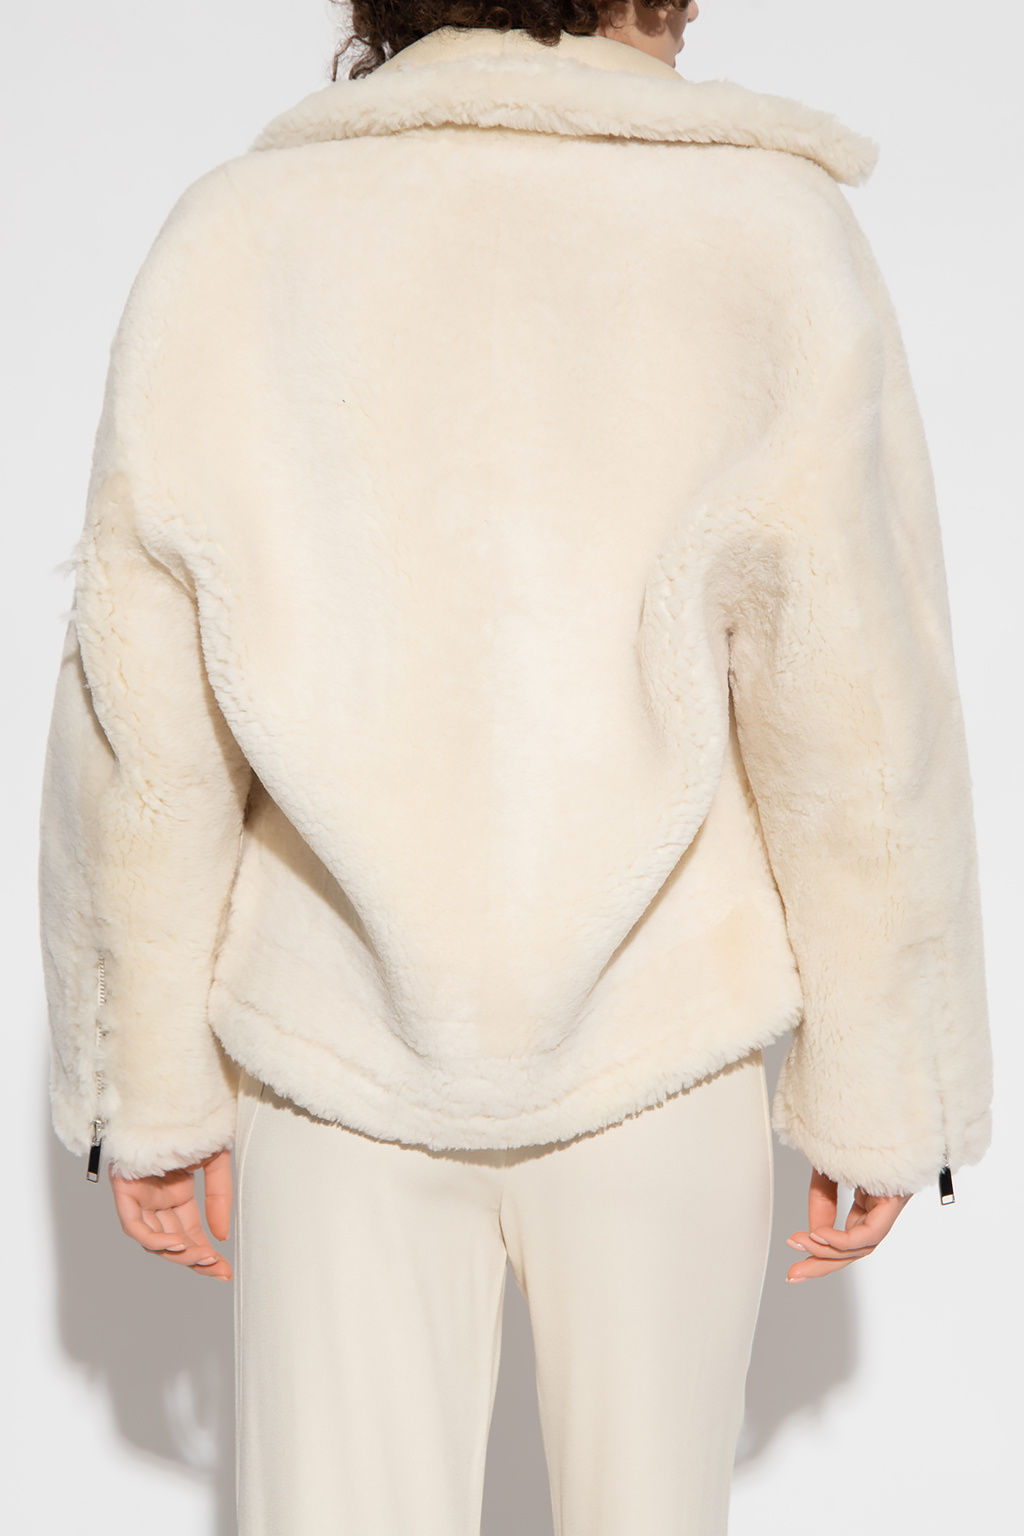 Jacquemus 'Pastre' shearling jacket, Women's Clothing